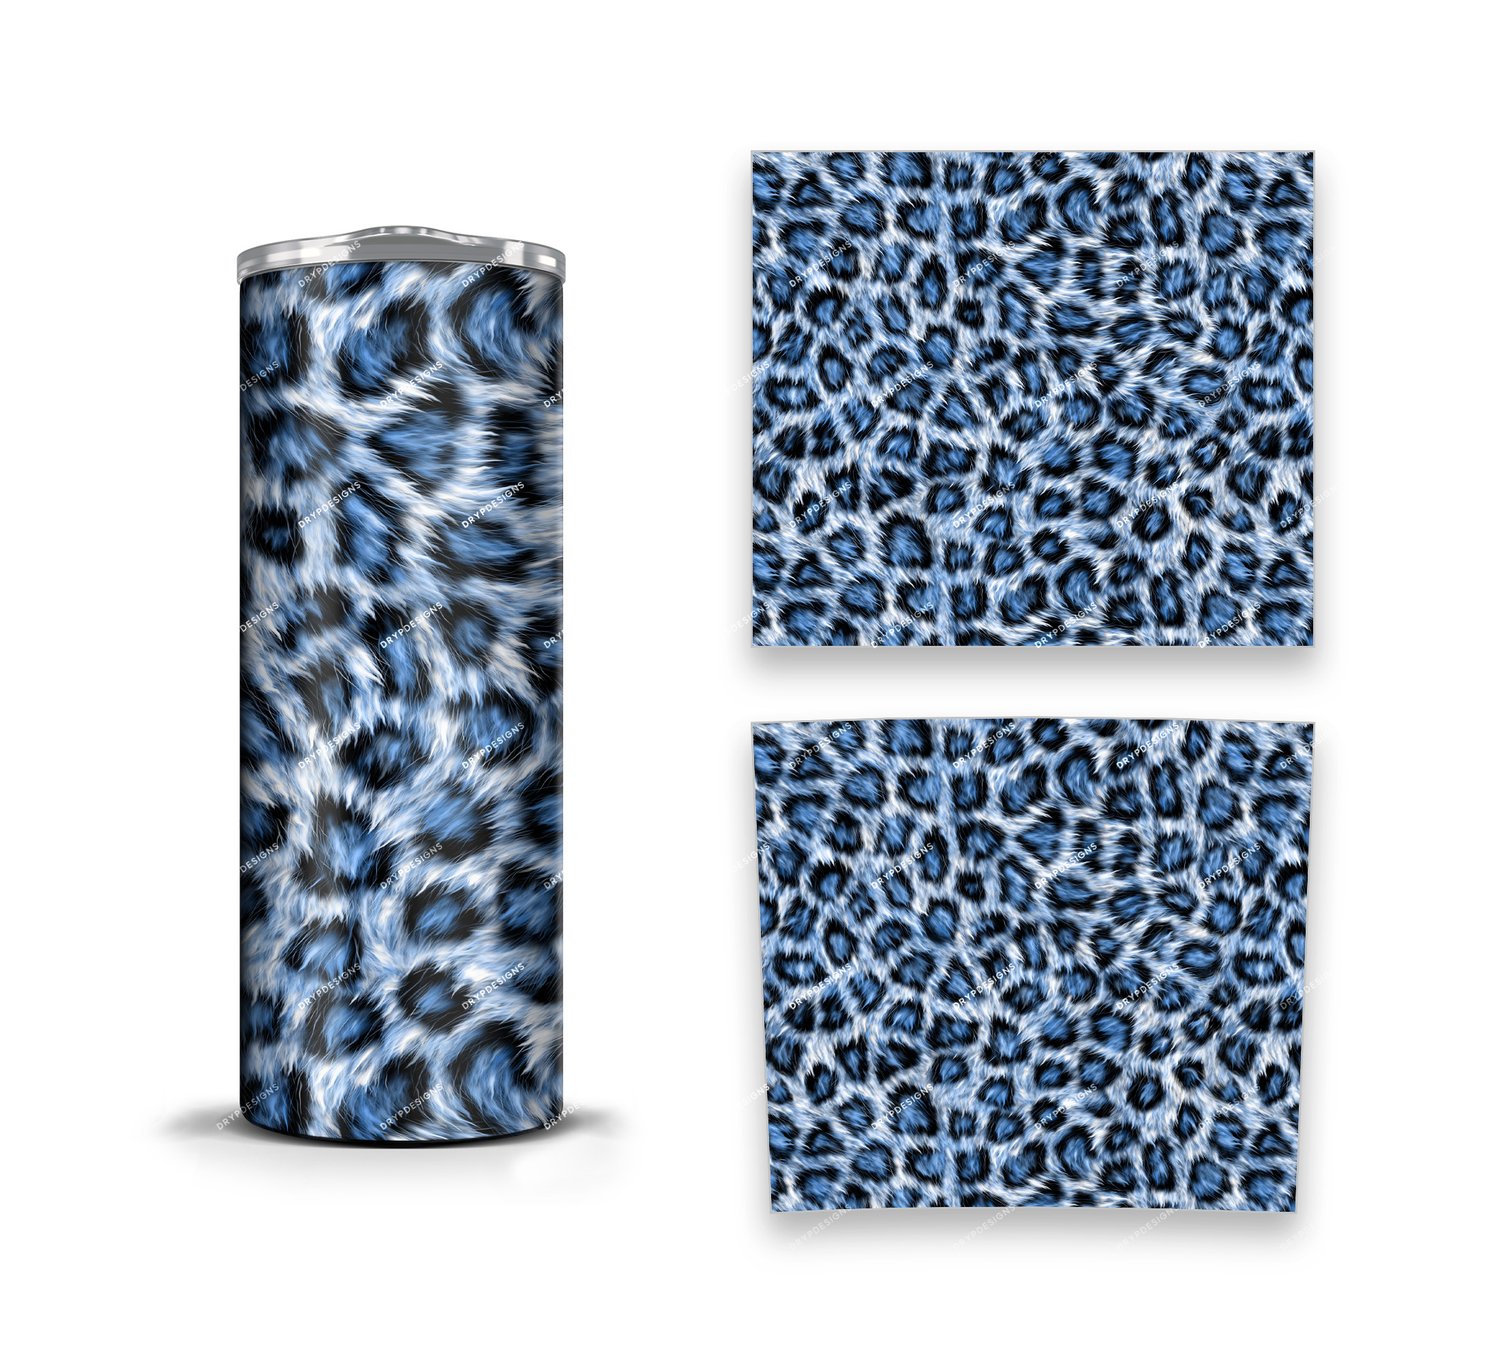 https://images.squarespace-cdn.com/content/v1/609701bc21f2ee5734517421/1691556284066-NDIMUFSF8NCOTYRKD7Z4/Realistic+Blue+Leopard+Tumbler+Cover+WM+02.jpg?format=1500w